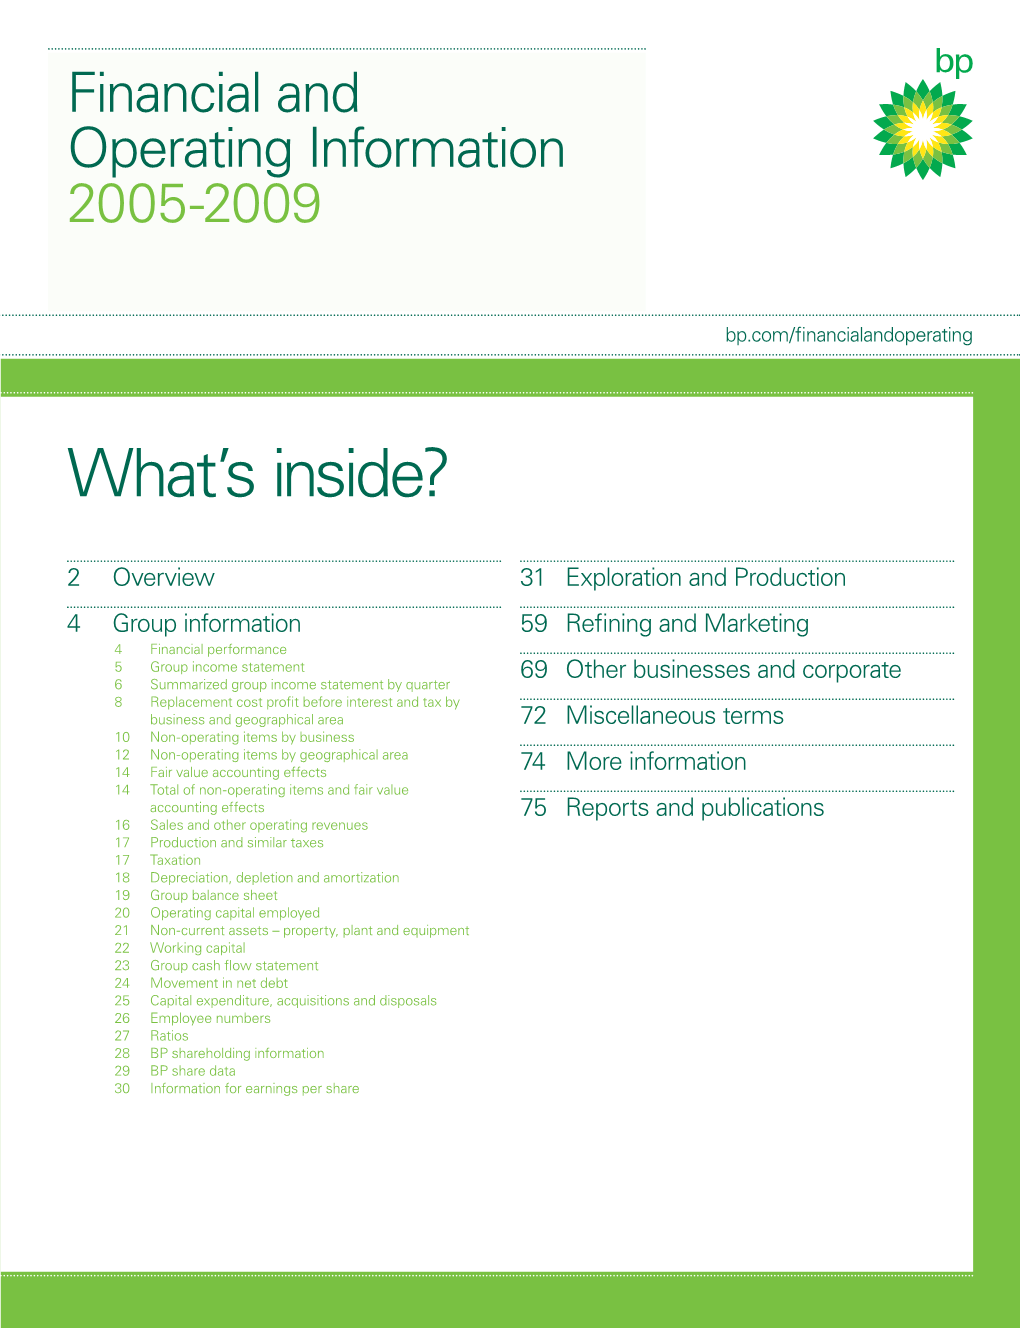 Financial and Operating Information 2005-2009